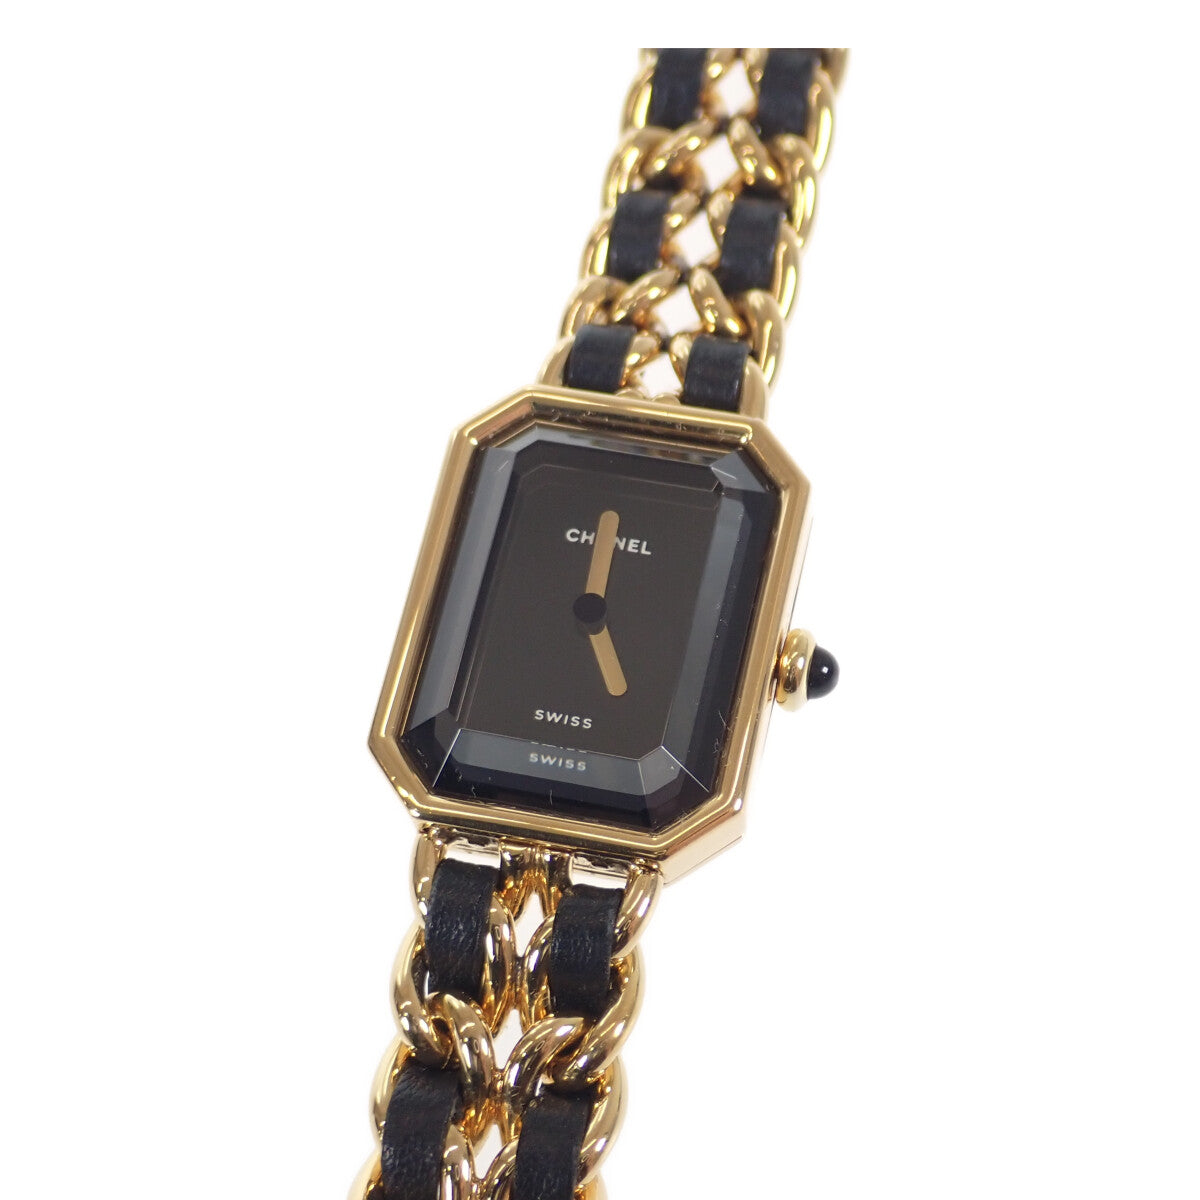 Chanel  Chanel Women's Premiere Watch H0001 in Black and Gold, Leather Strap, Black Quartz Dial, Size L (Pre-owned) H0001 in Good condition